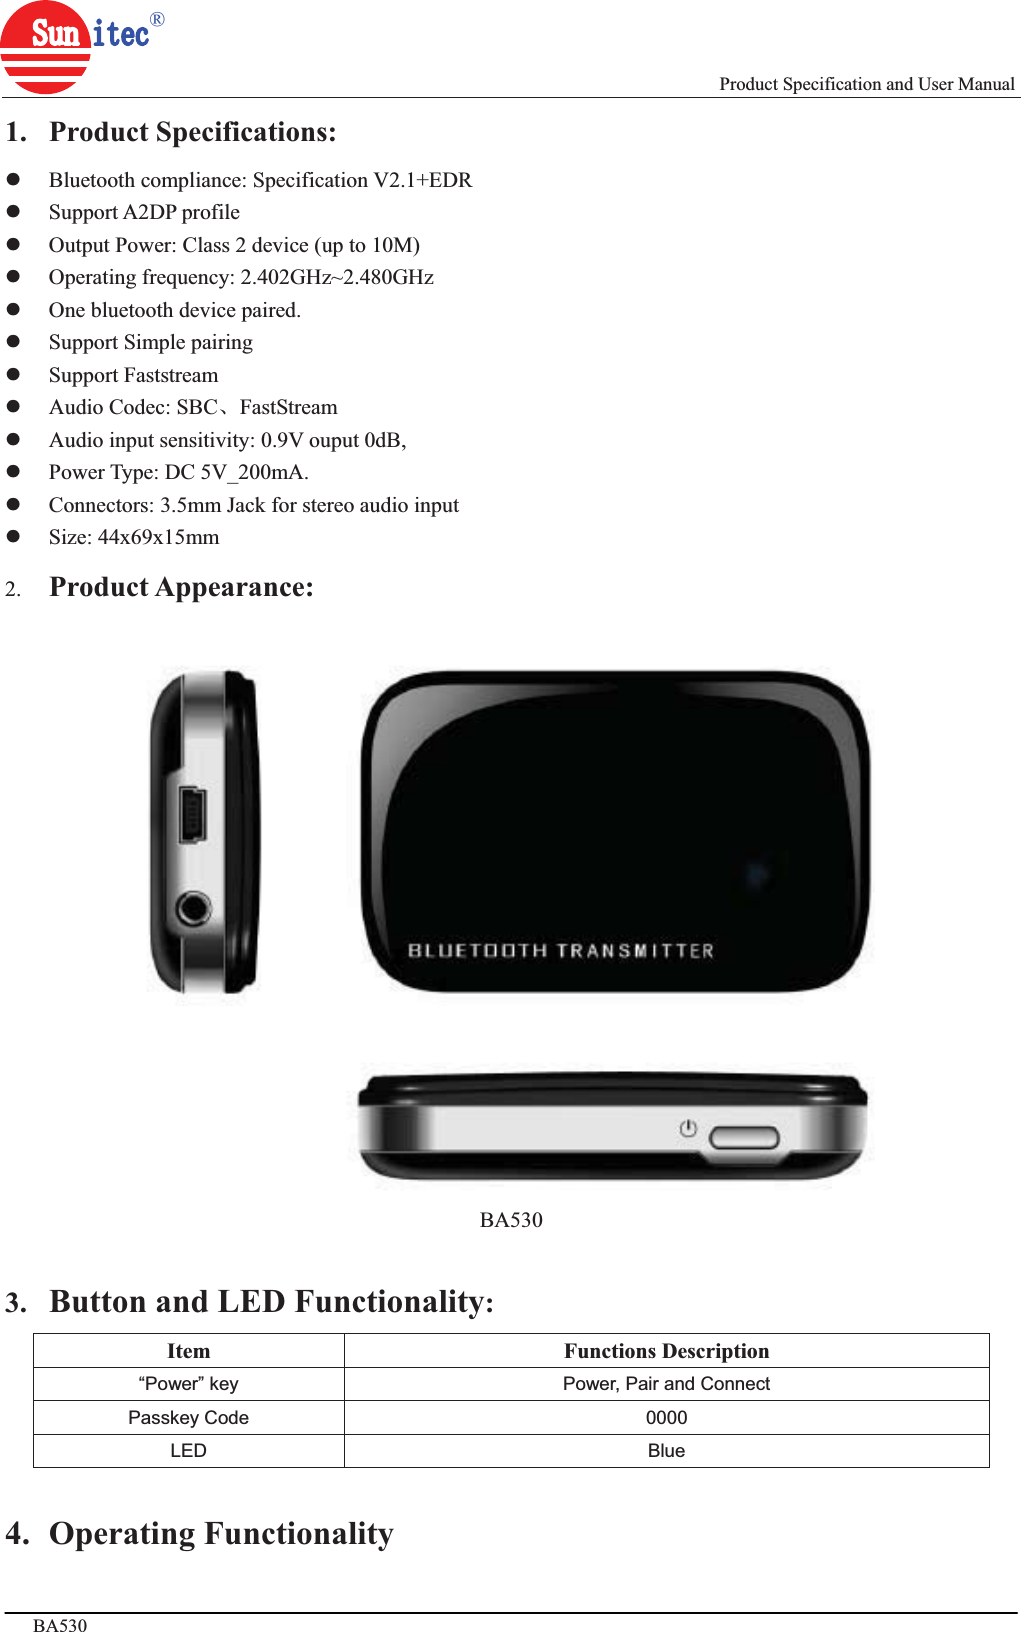                                                                             Product Specification and User Manual BA530                              www.sunitec.com.tw ㅜ 3亥,ޡ 4亥ϟ1. Product Specifications: zBluetooth compliance: Specification V2.1+EDR zSupport A2DP profile zOutput Power: Class 2 device (up to 10M) zOperating frequency: 2.402GHz~2.480GHz zOne bluetooth device paired.   zSupport Simple pairing zSupport Faststream   zAudio Codec: SBCǃFastStream zAudio input sensitivity: 0.9V ouput 0dB,   zPower Type: DC 5V_200mA. zConnectors: 3.5mm Jack for stereo audio input zSize: 44x69x15mm 2. Product Appearance:BA530 3. Button and LED Functionality:Item Functions Description “Power” key  Power, Pair and Connect Passkey Code  0000 LED Blue 4. Operating Functionality 